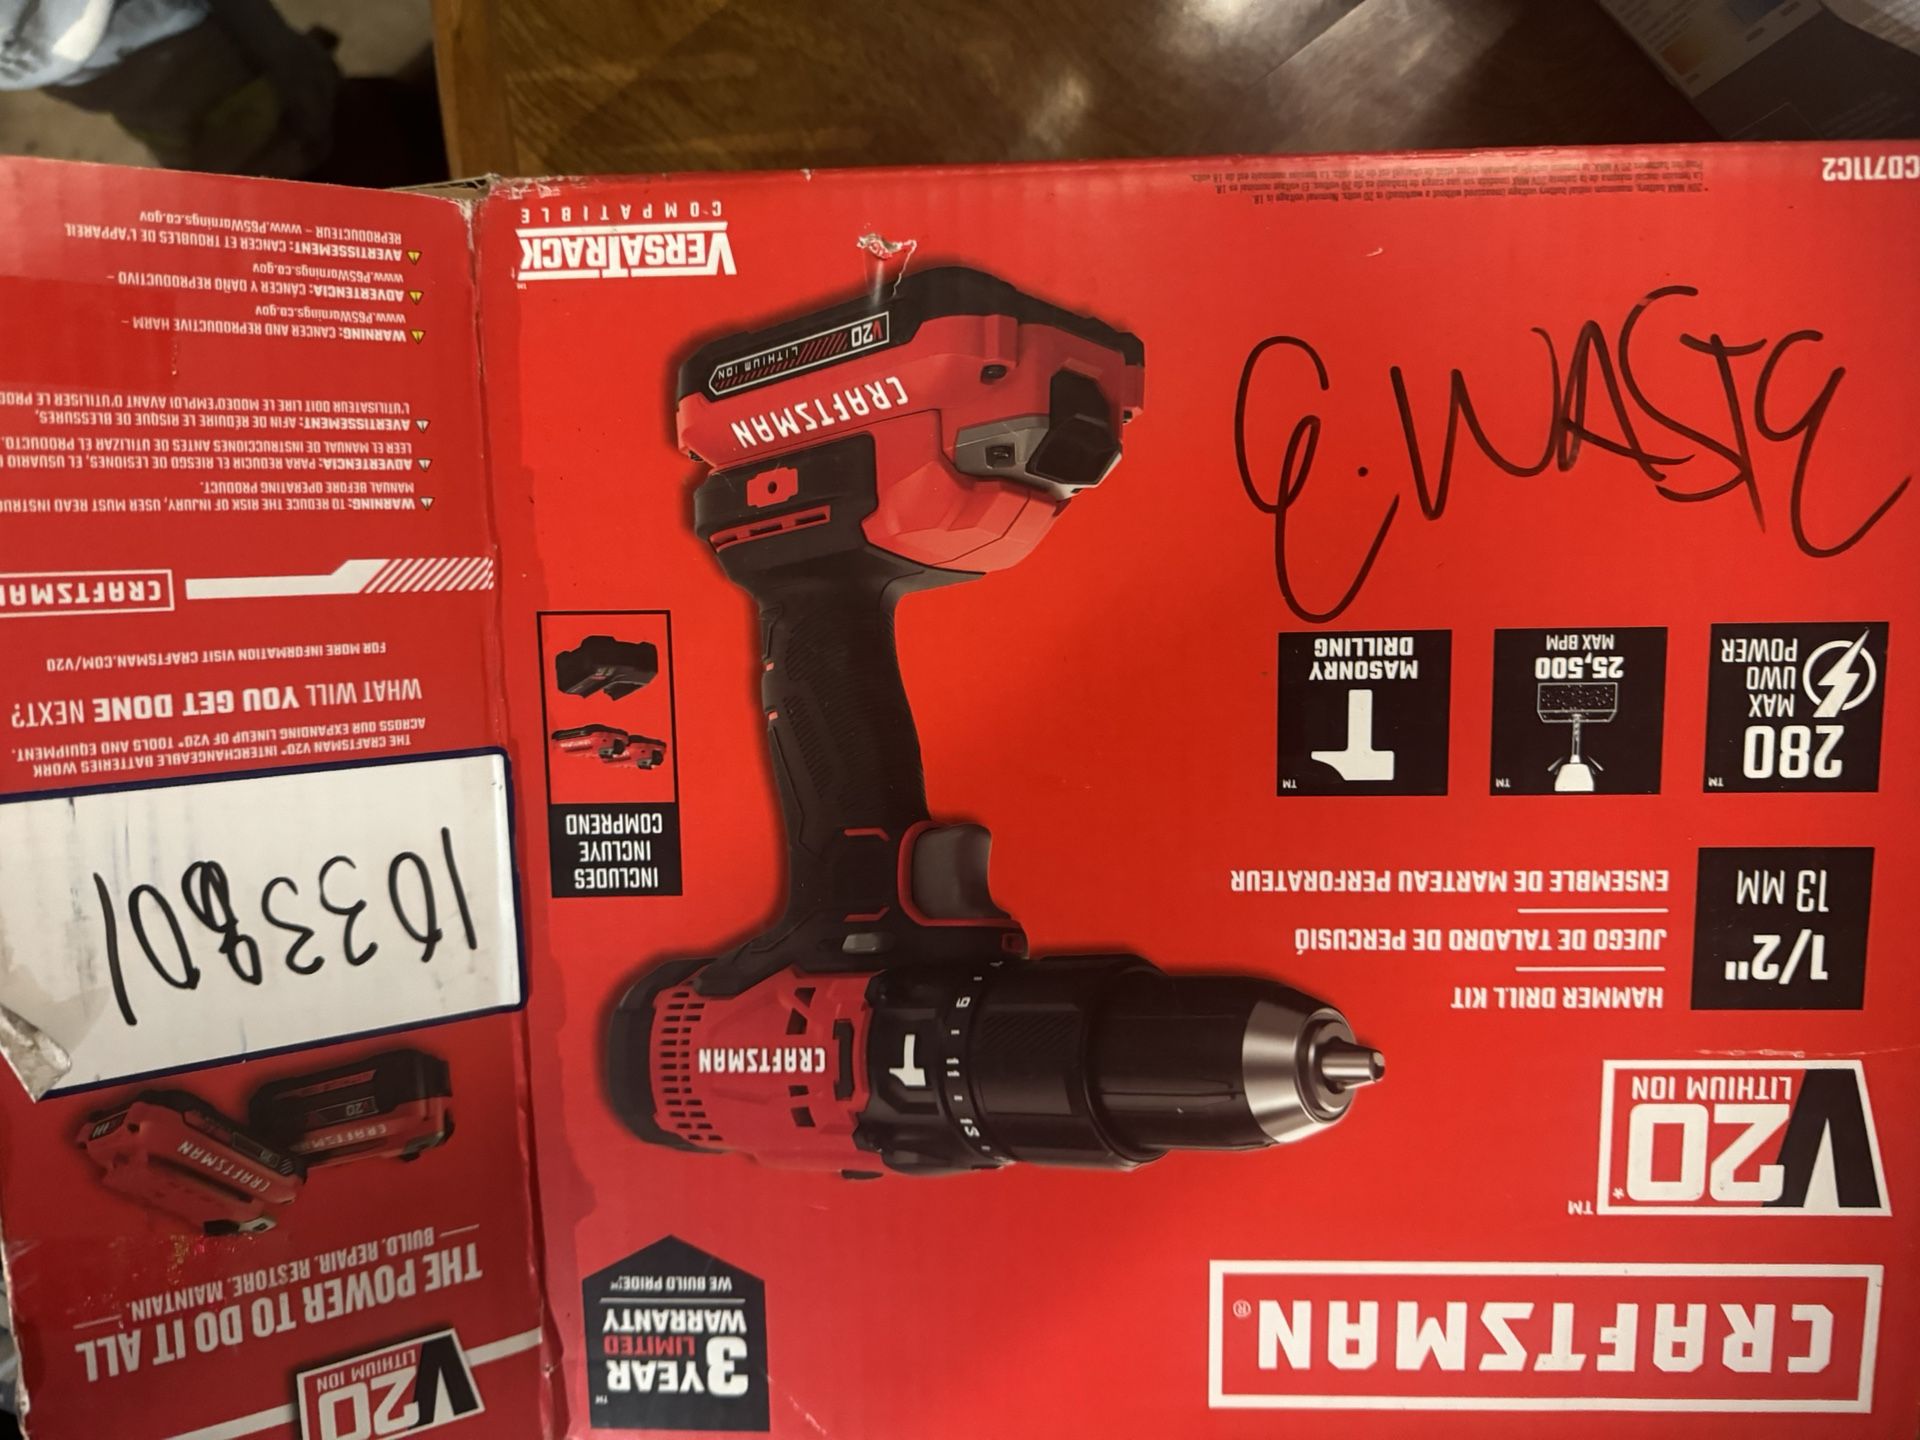 CRAFTSMAN V20 20-volt Max 1/2-in Cordless Drill (1-Battery Included, Charger Included